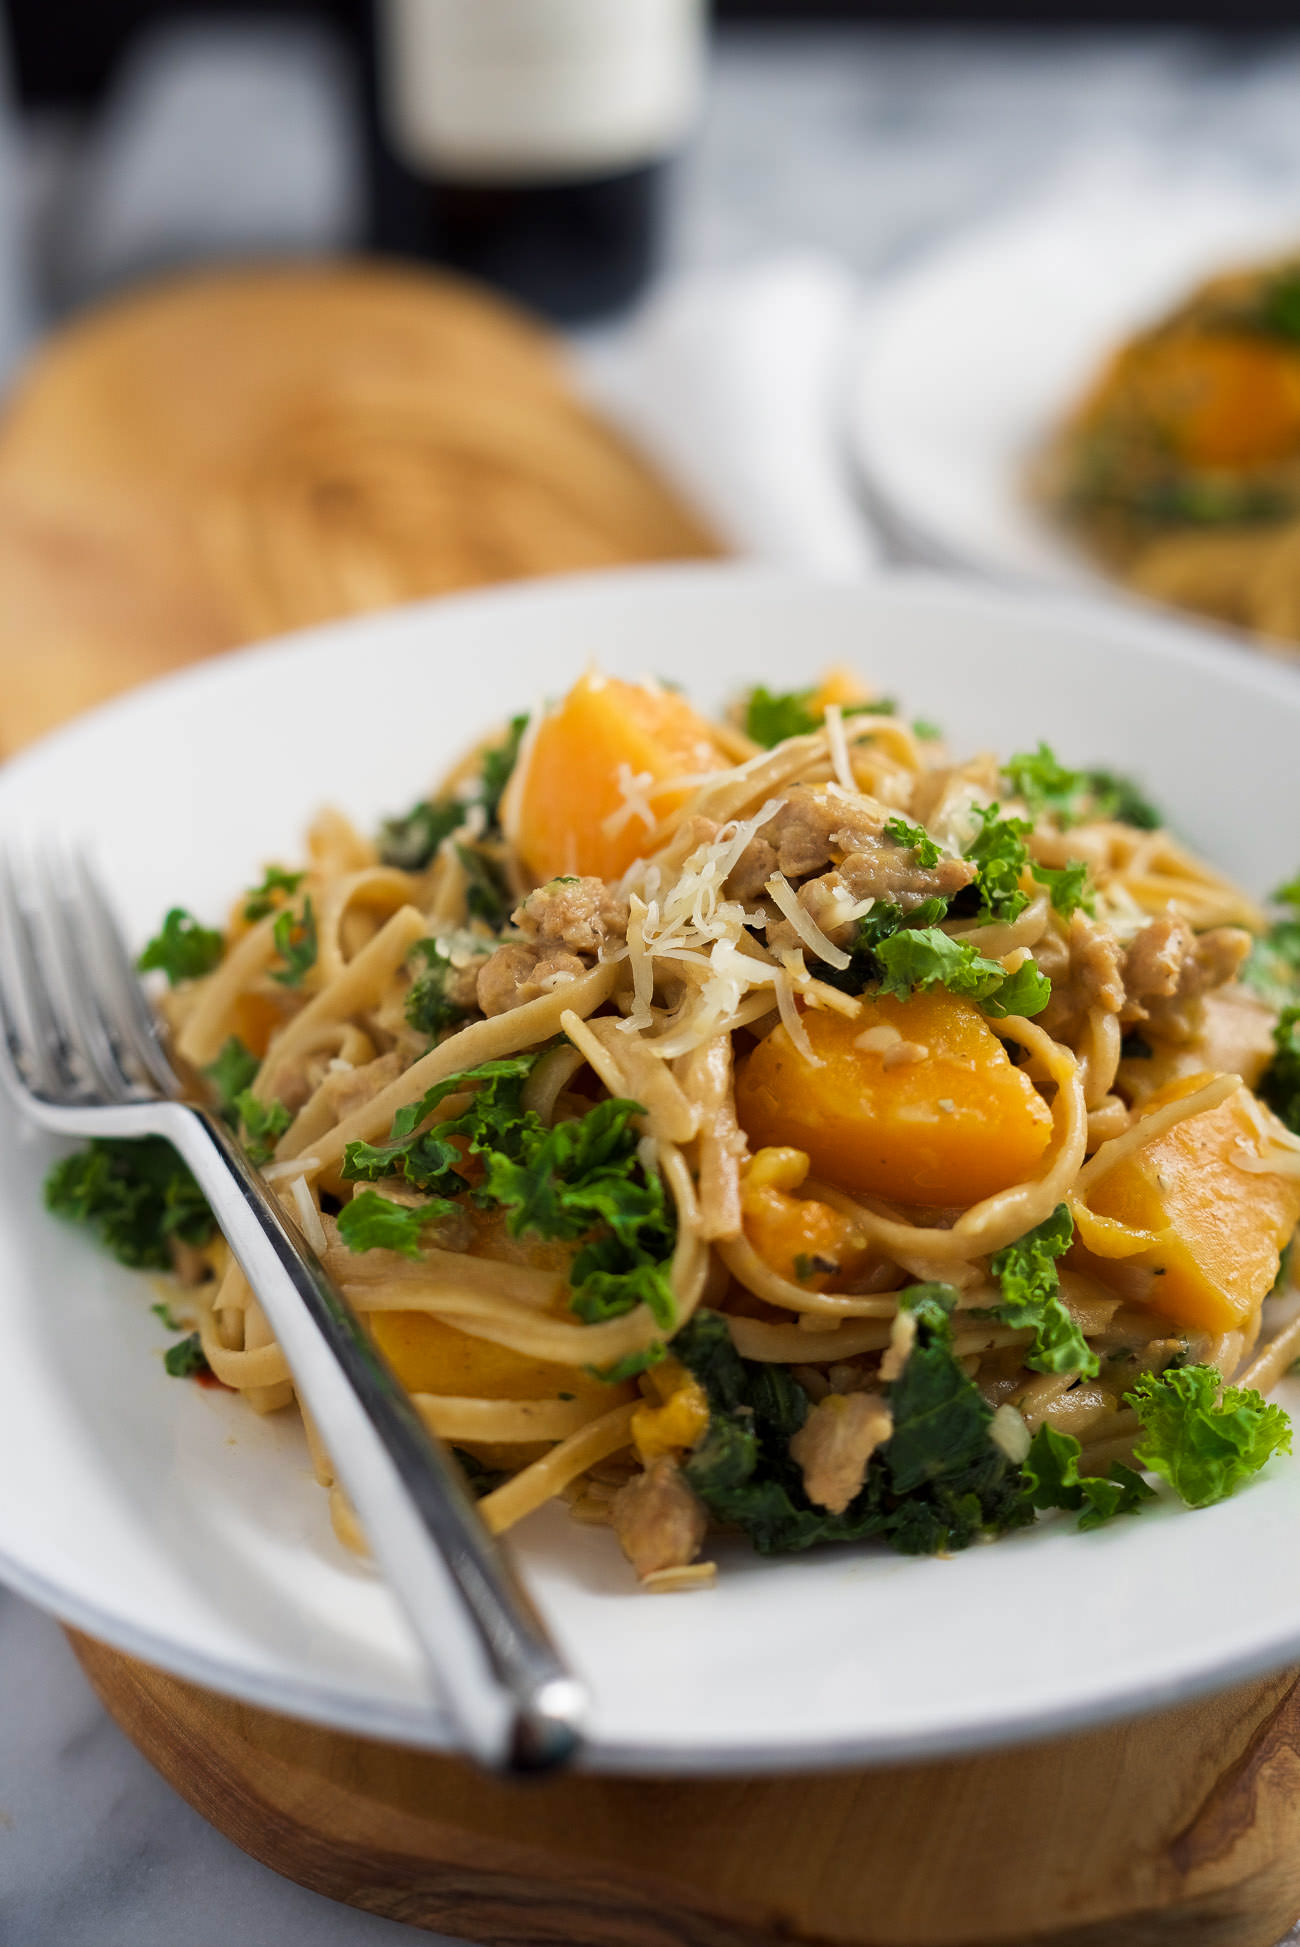 Butternut Squash Linguine Pasta is filled with whole wheat pasta, sweet Italian turkey sausage, kale, butternut squash and brought together with creamy gruyere cheese! A perfect fall dinner. 